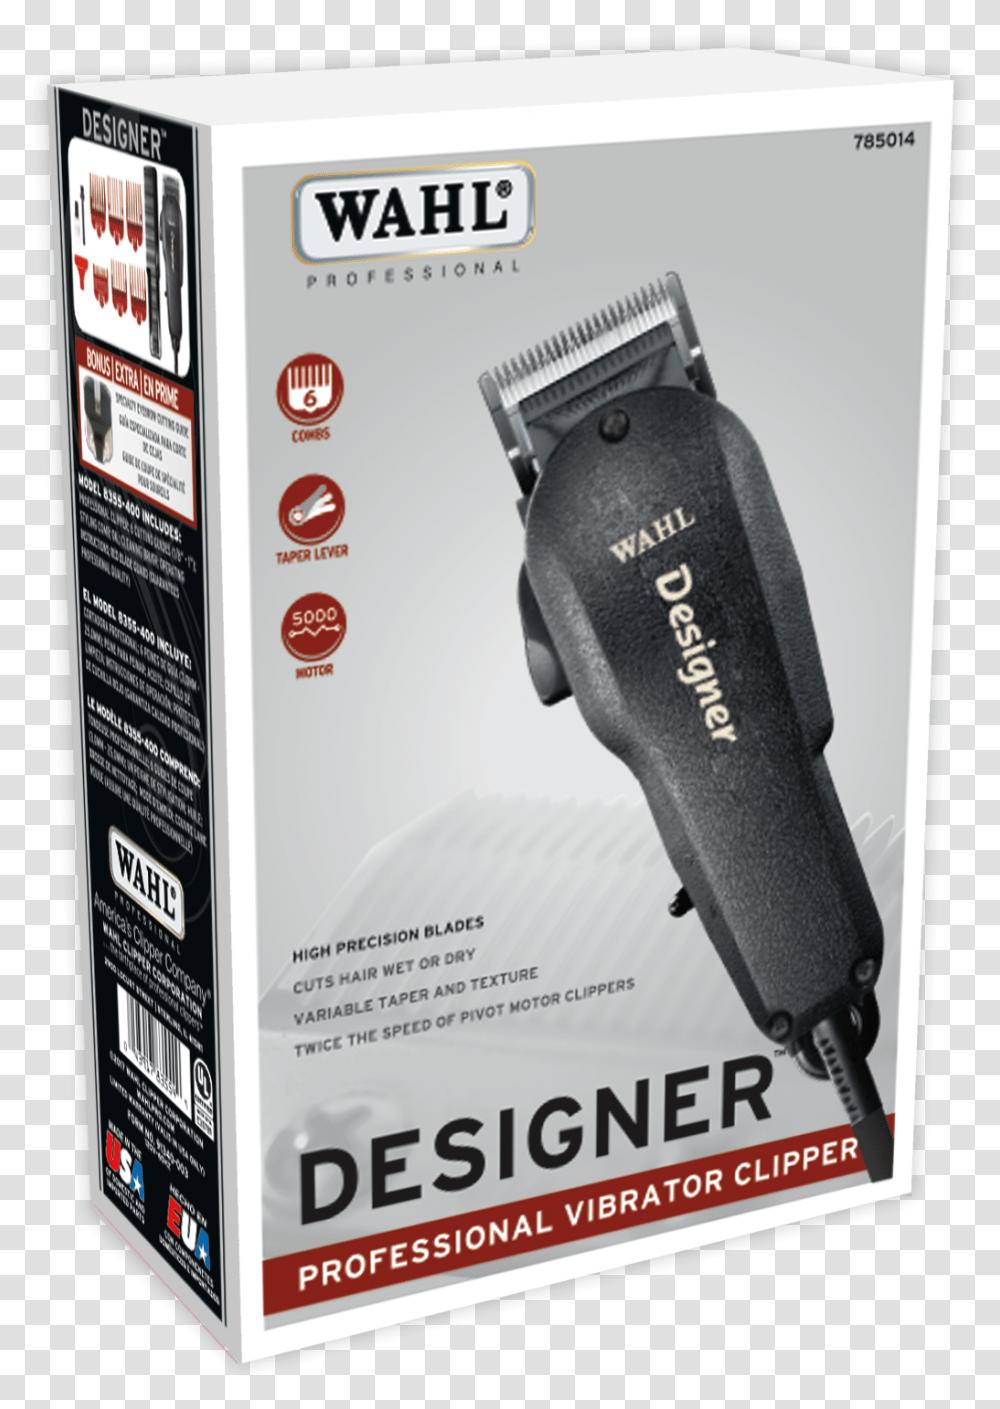 Designer Wahlprocom Clipper, Appliance, Blow Dryer, Hair Drier, Clothes Iron Transparent Png